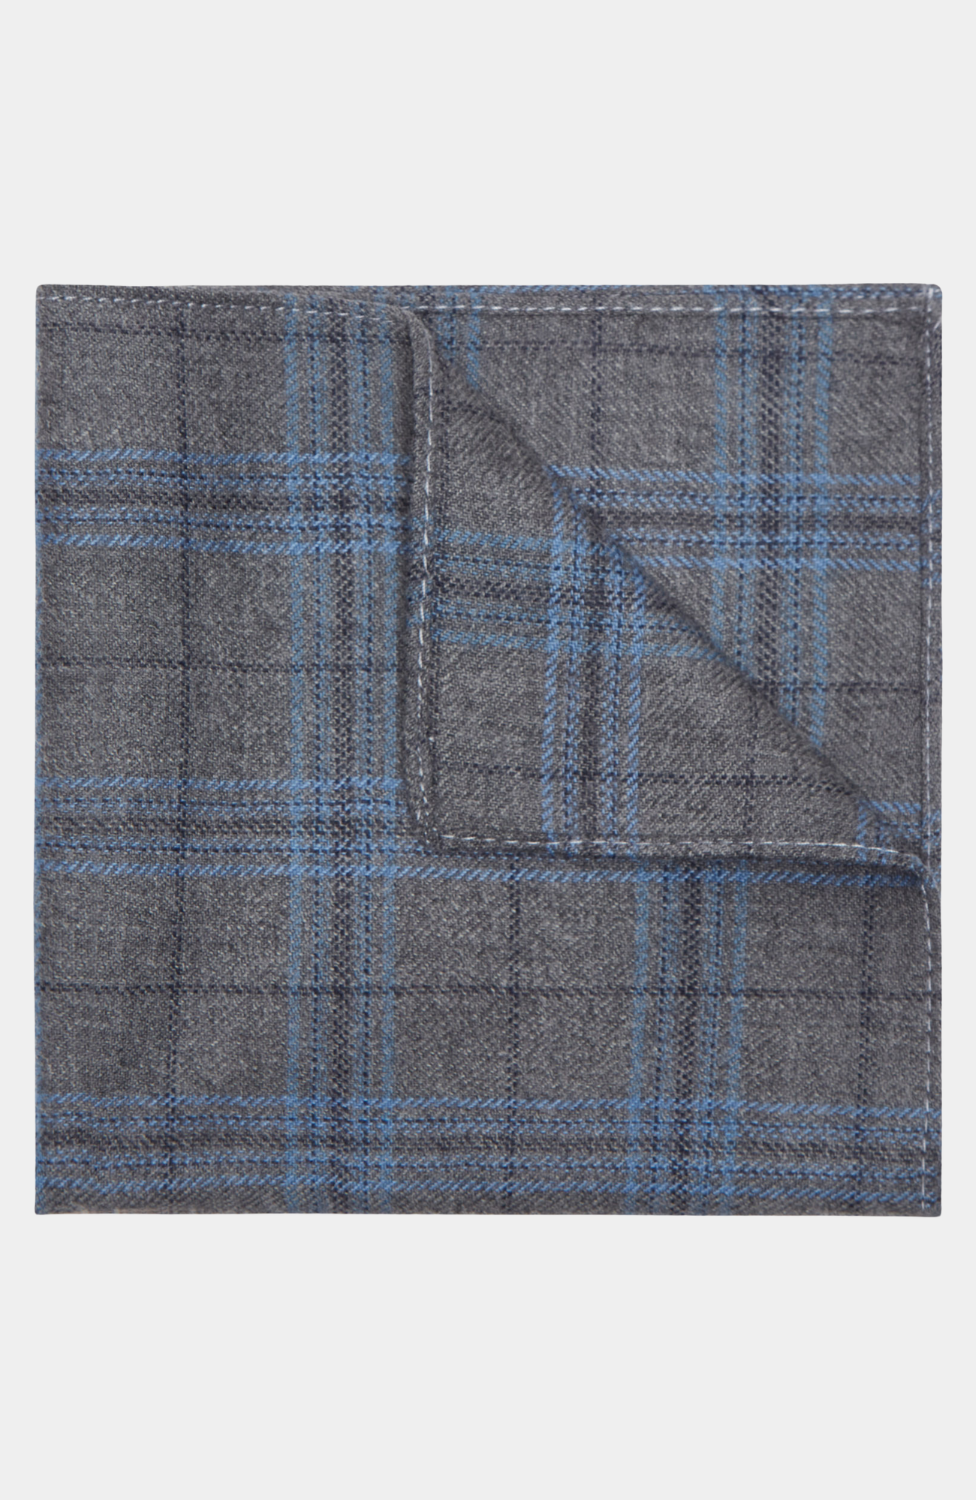 JERSEY POCKET SQUARE - HIRE: £5.00